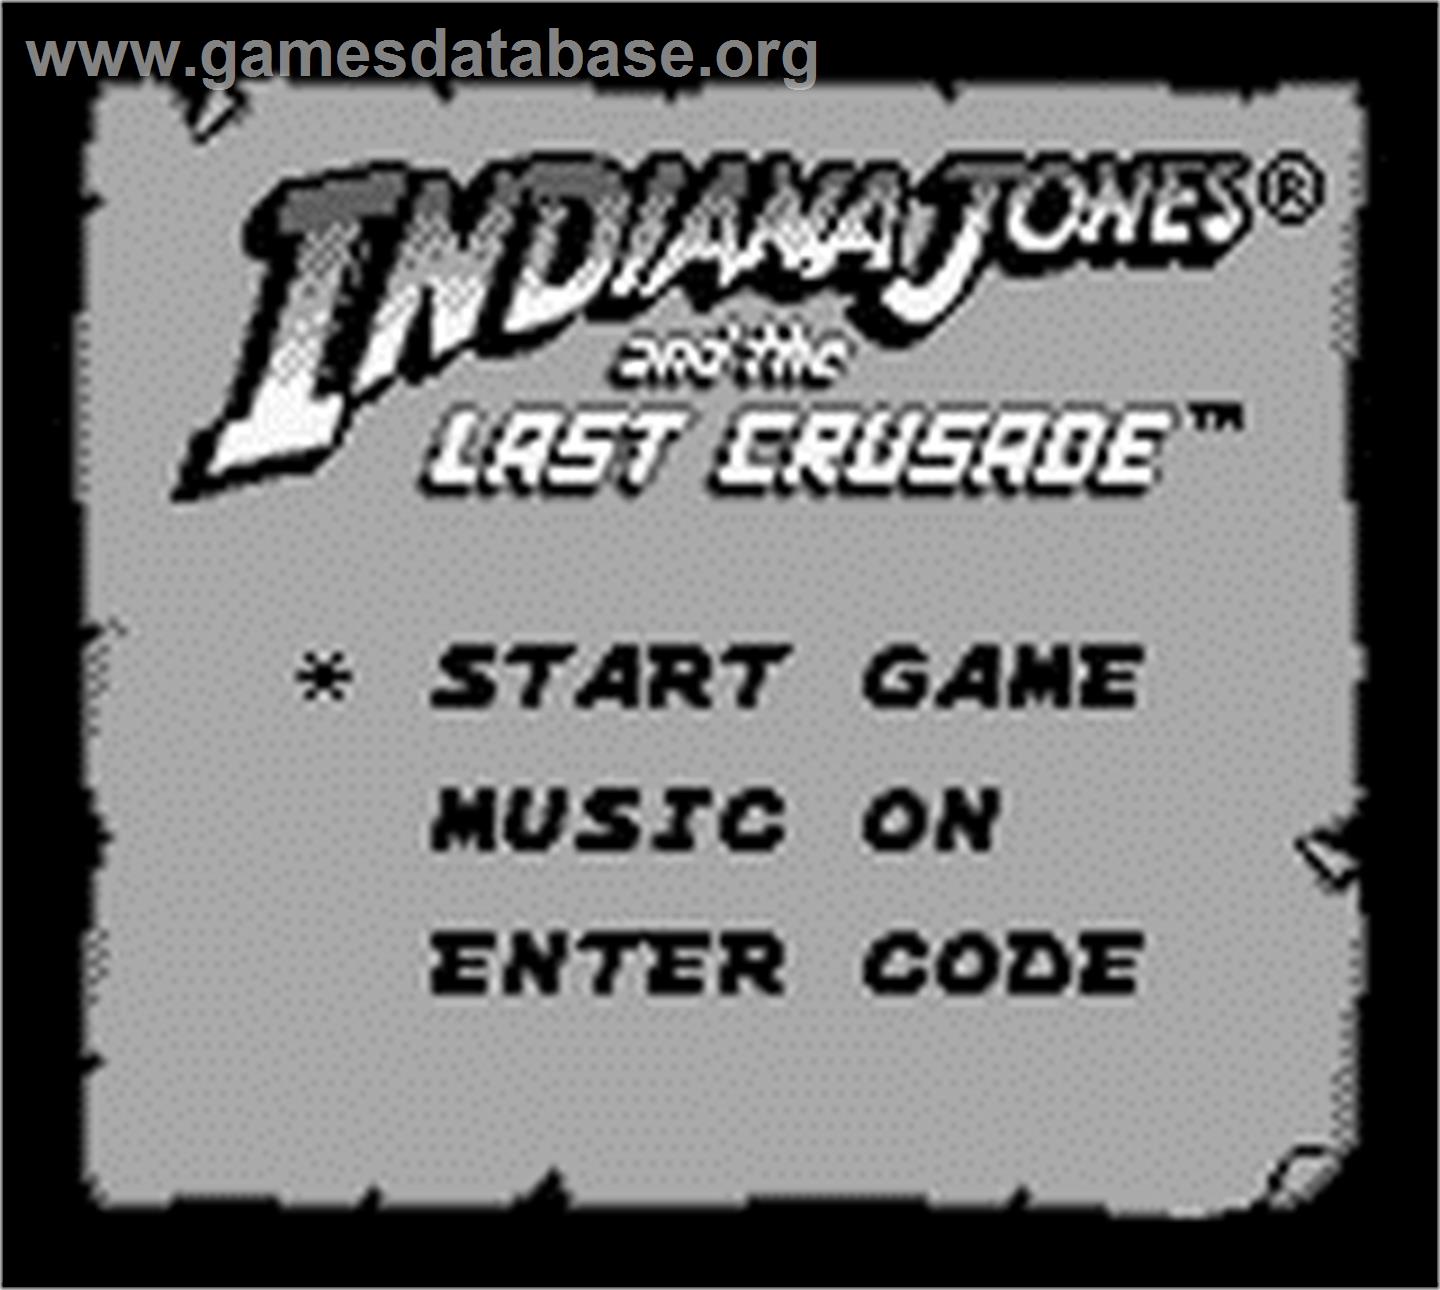 Indiana Jones and the Last Crusade: The Action Game - Nintendo Game Boy - Artwork - Title Screen